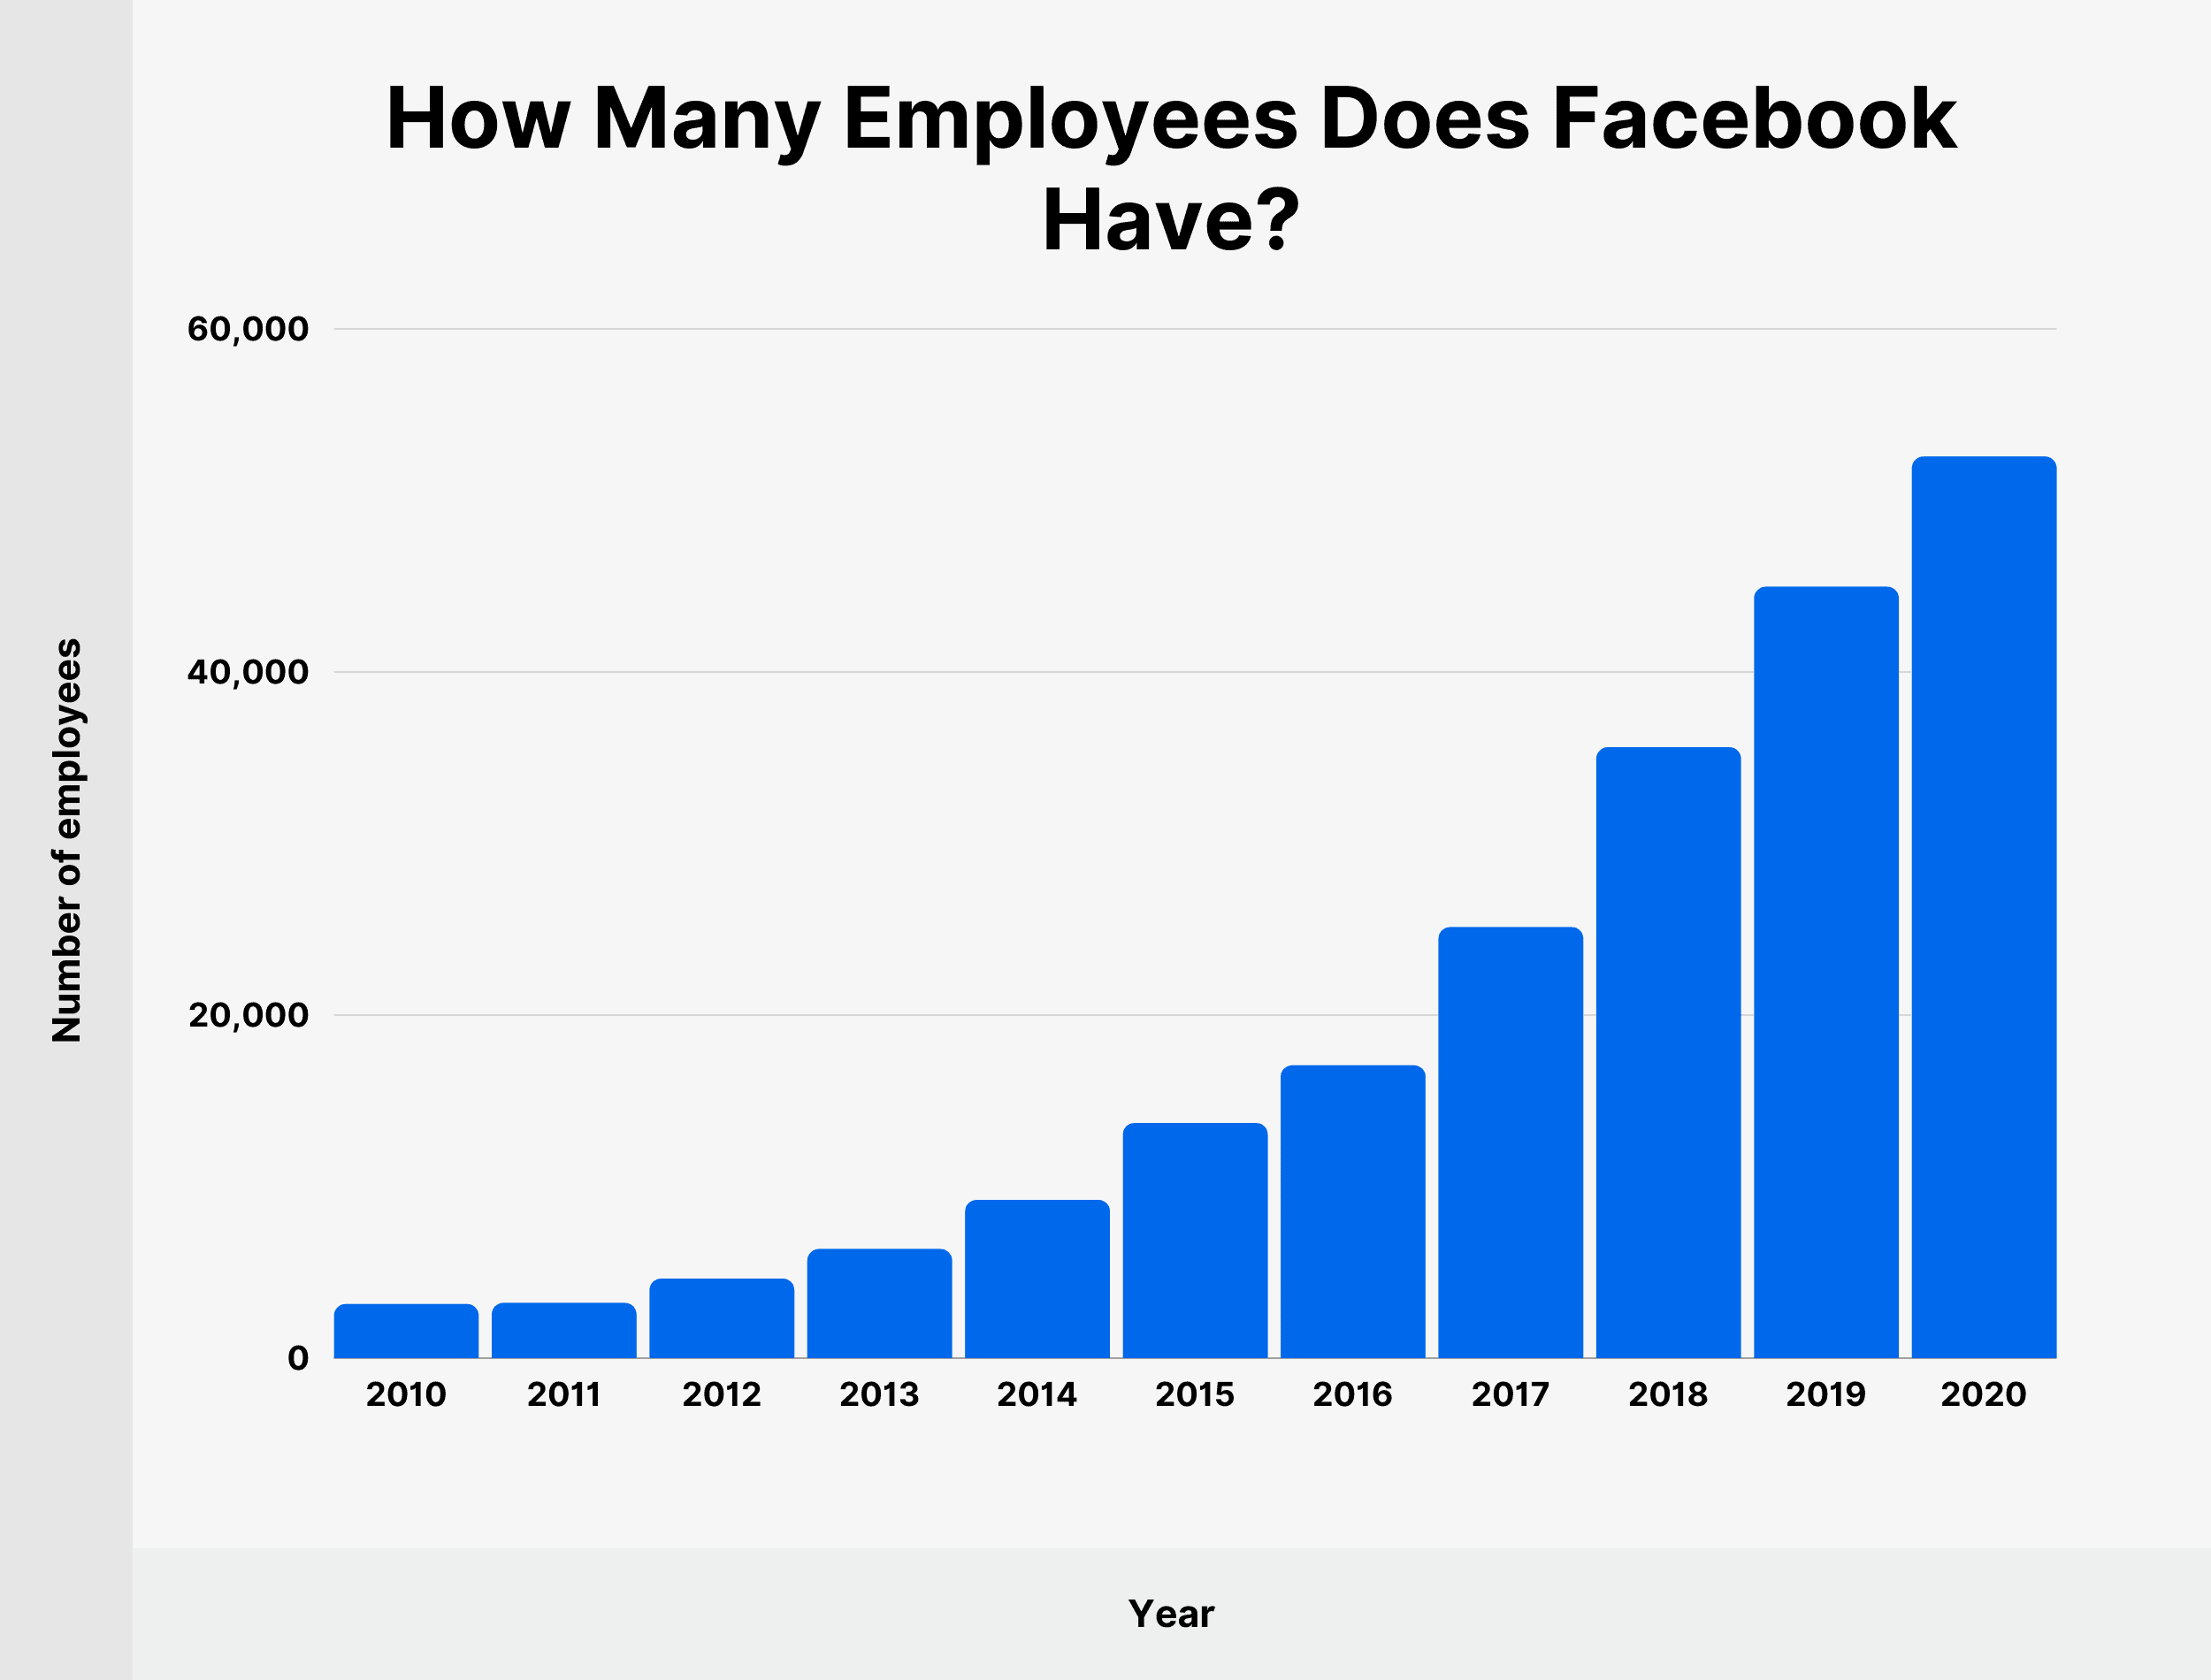 How Many Employees Does Facebook Have?